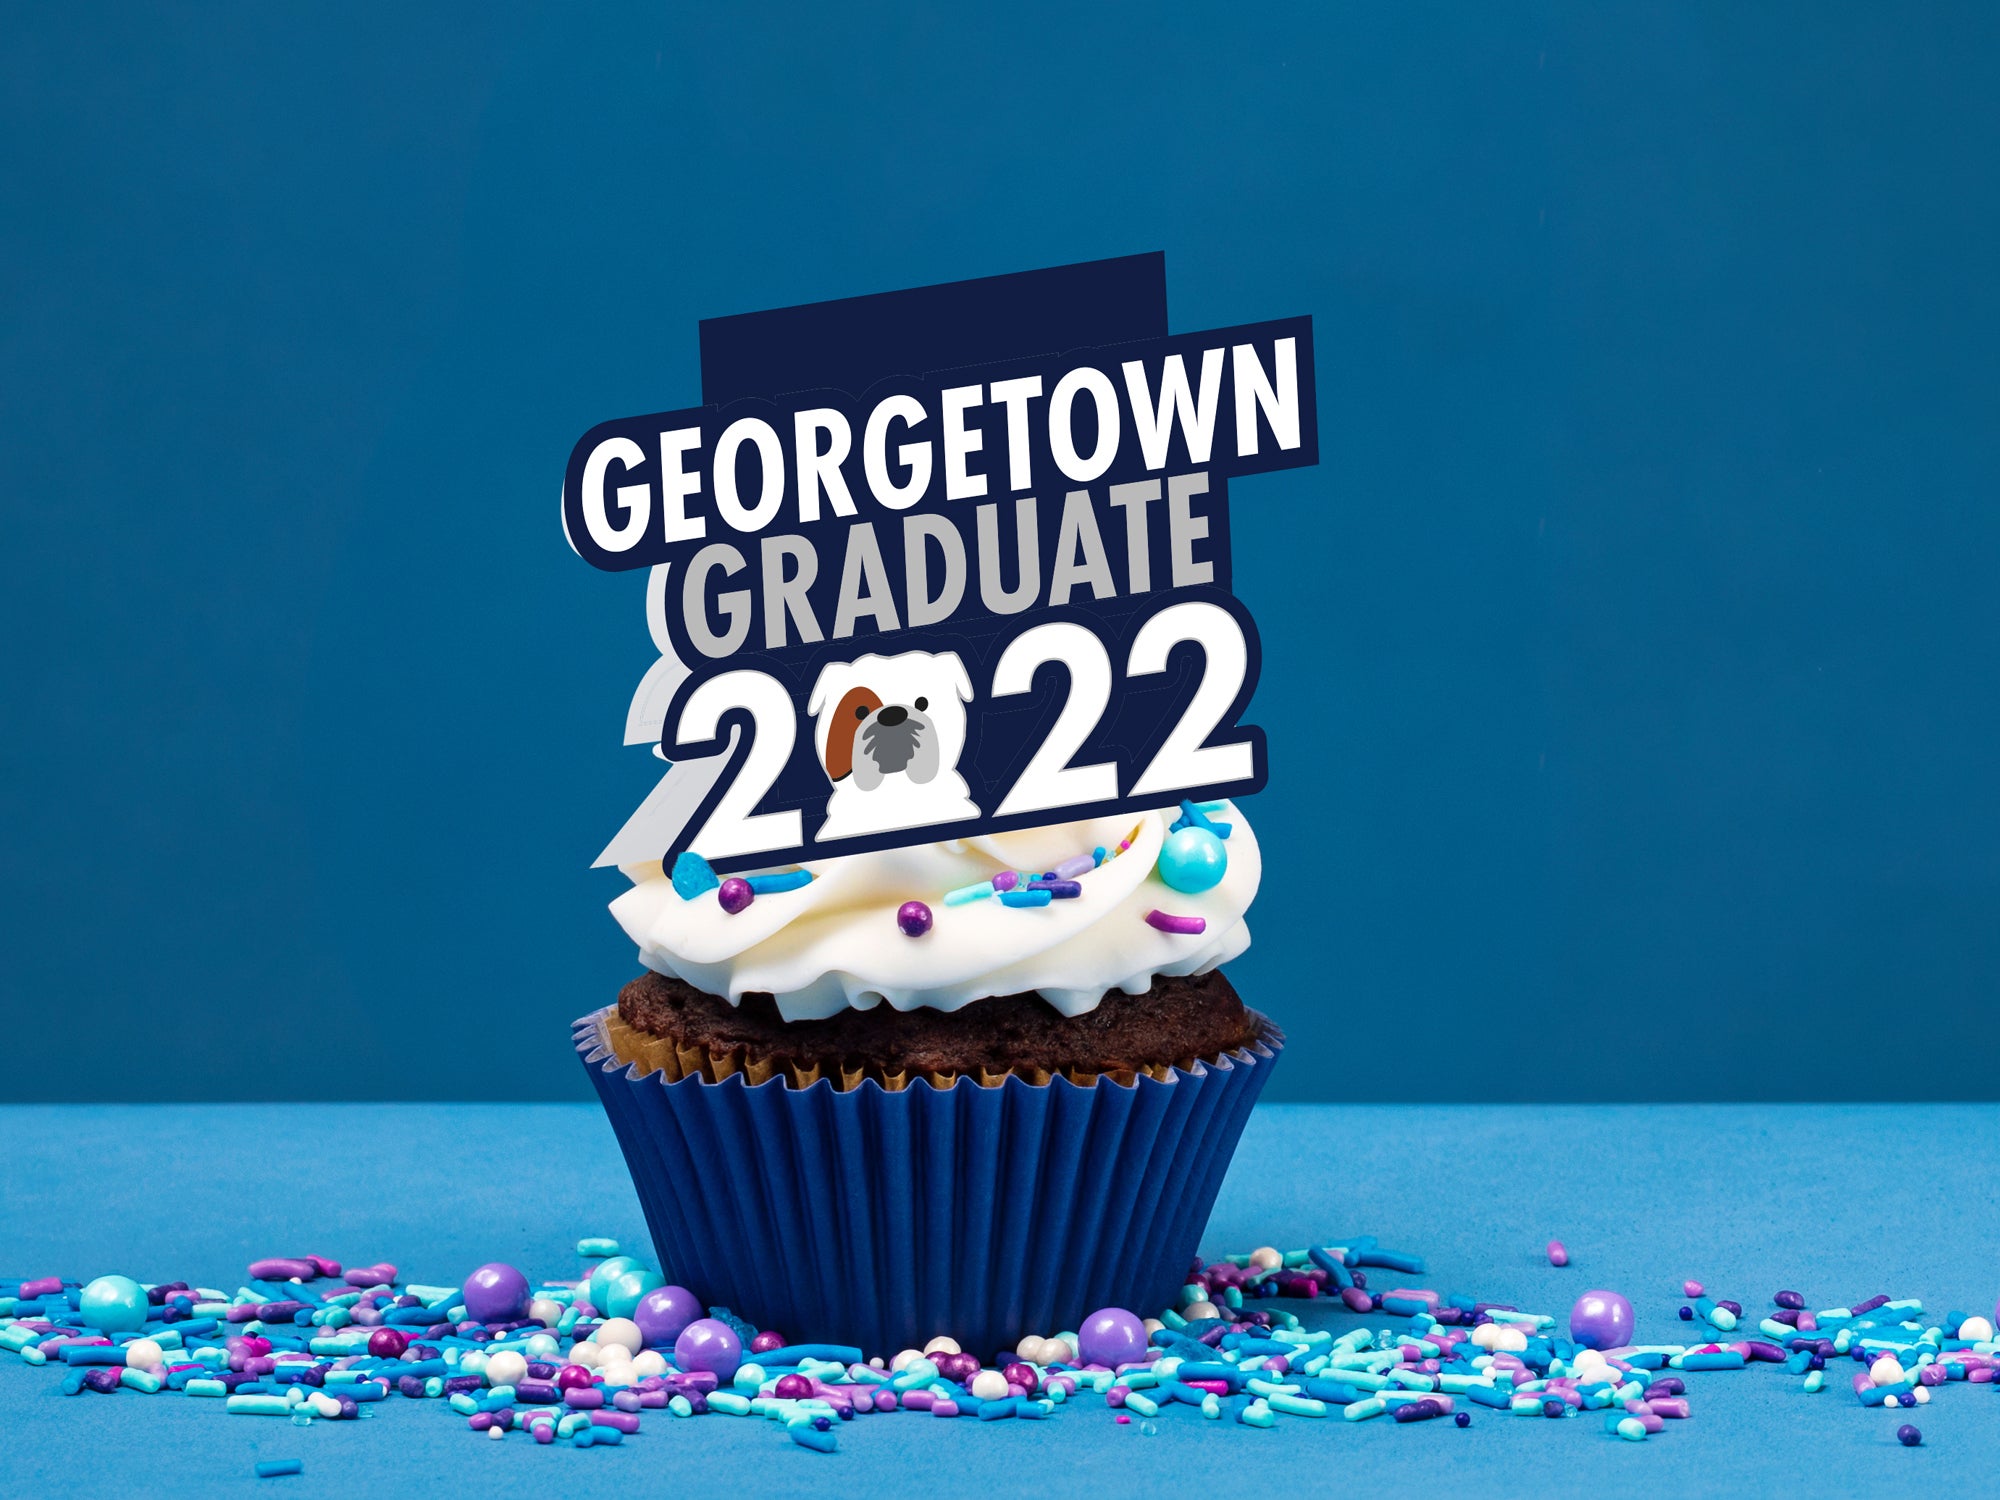 Cupcake with a topper that says Georgetown Graduate 2022," with Jack the Bulldog as the zero